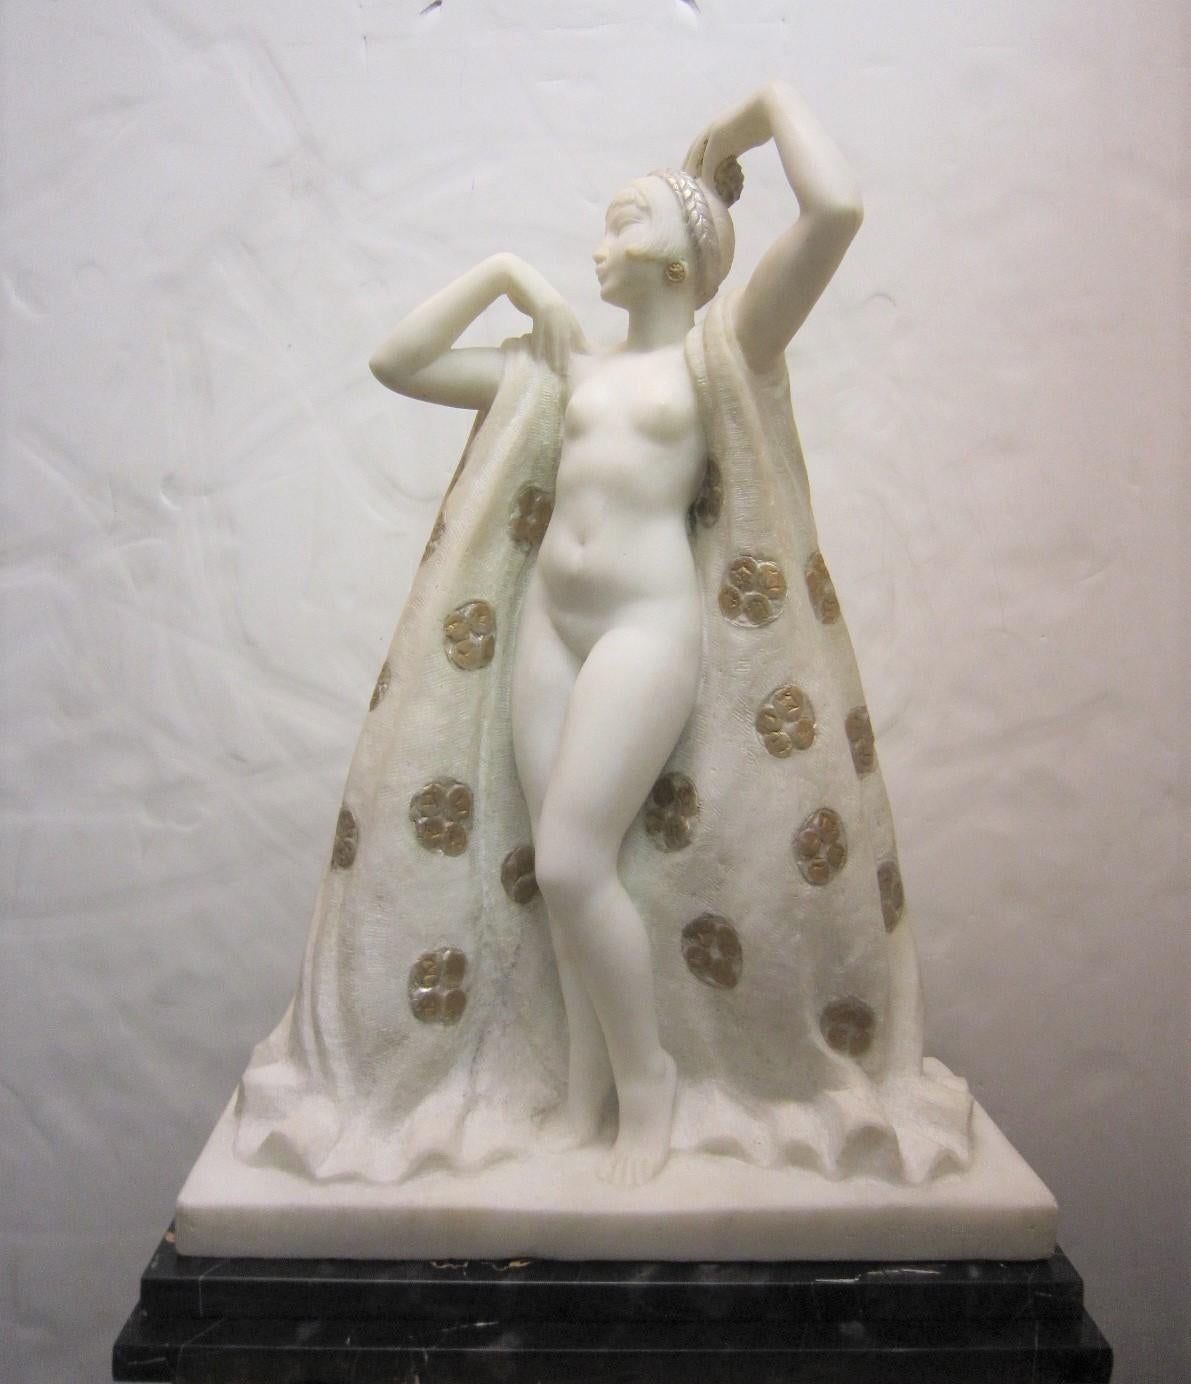 An elegant French, original hand carved natural specimen Carrara marble sculpture of a standing nude woman delicately balancing her hands above her head while royally wrapped with a cape. The figure is mysteriously concealed from behind, yet